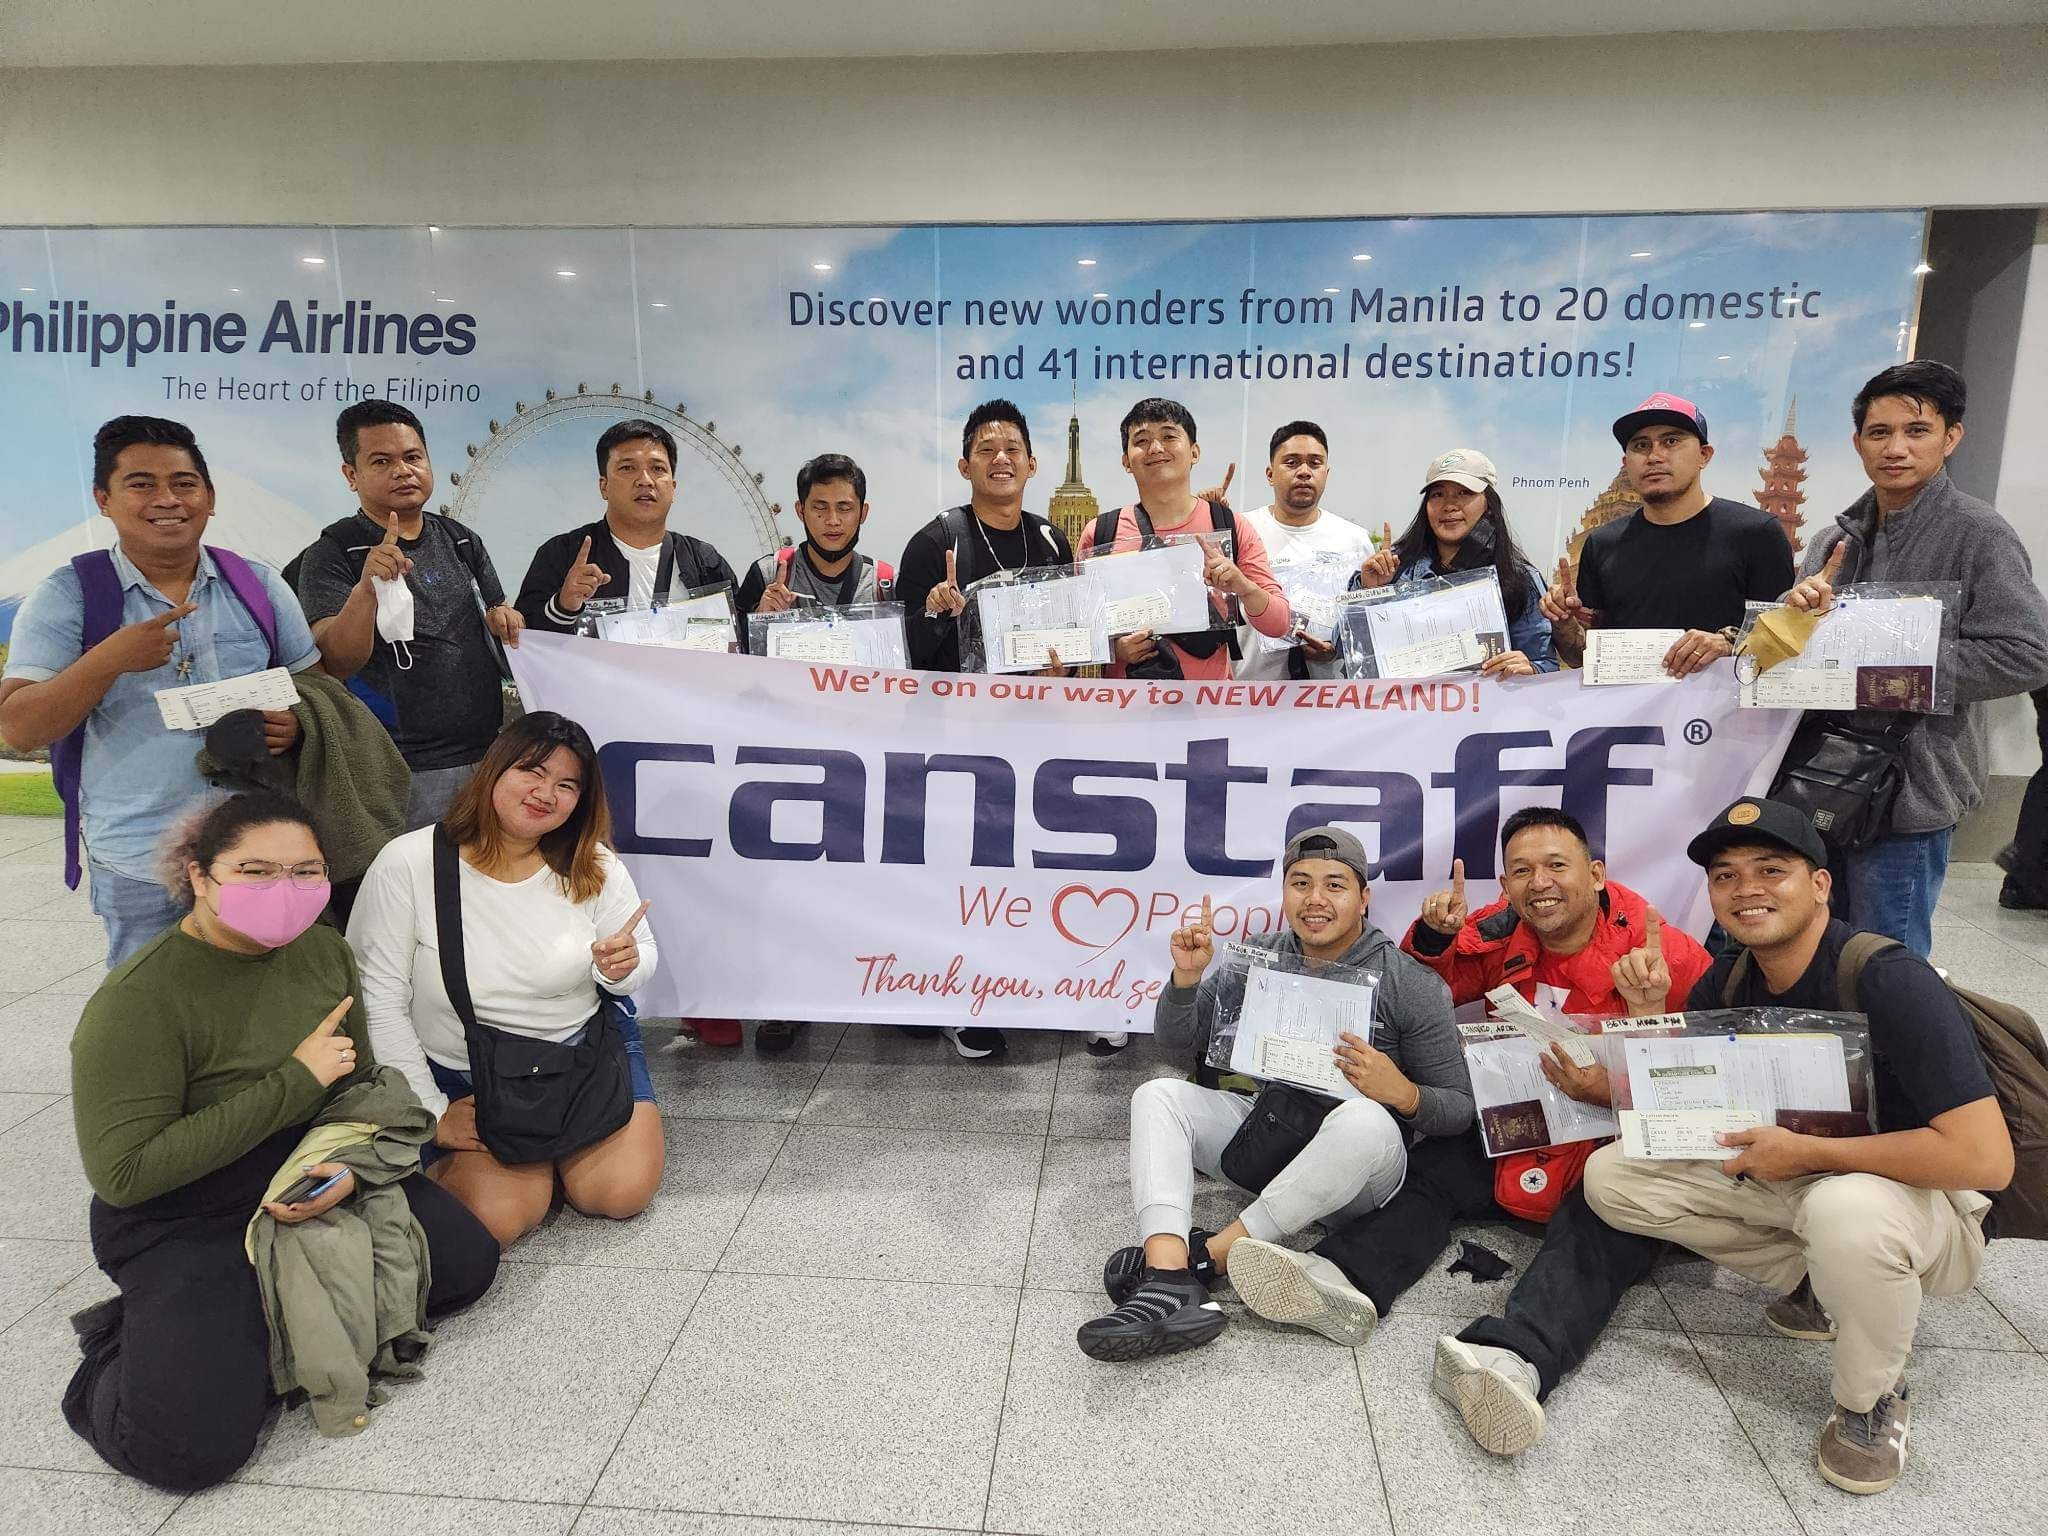 Canstaff Butchers leaving Manila Airport destined for New Zealand